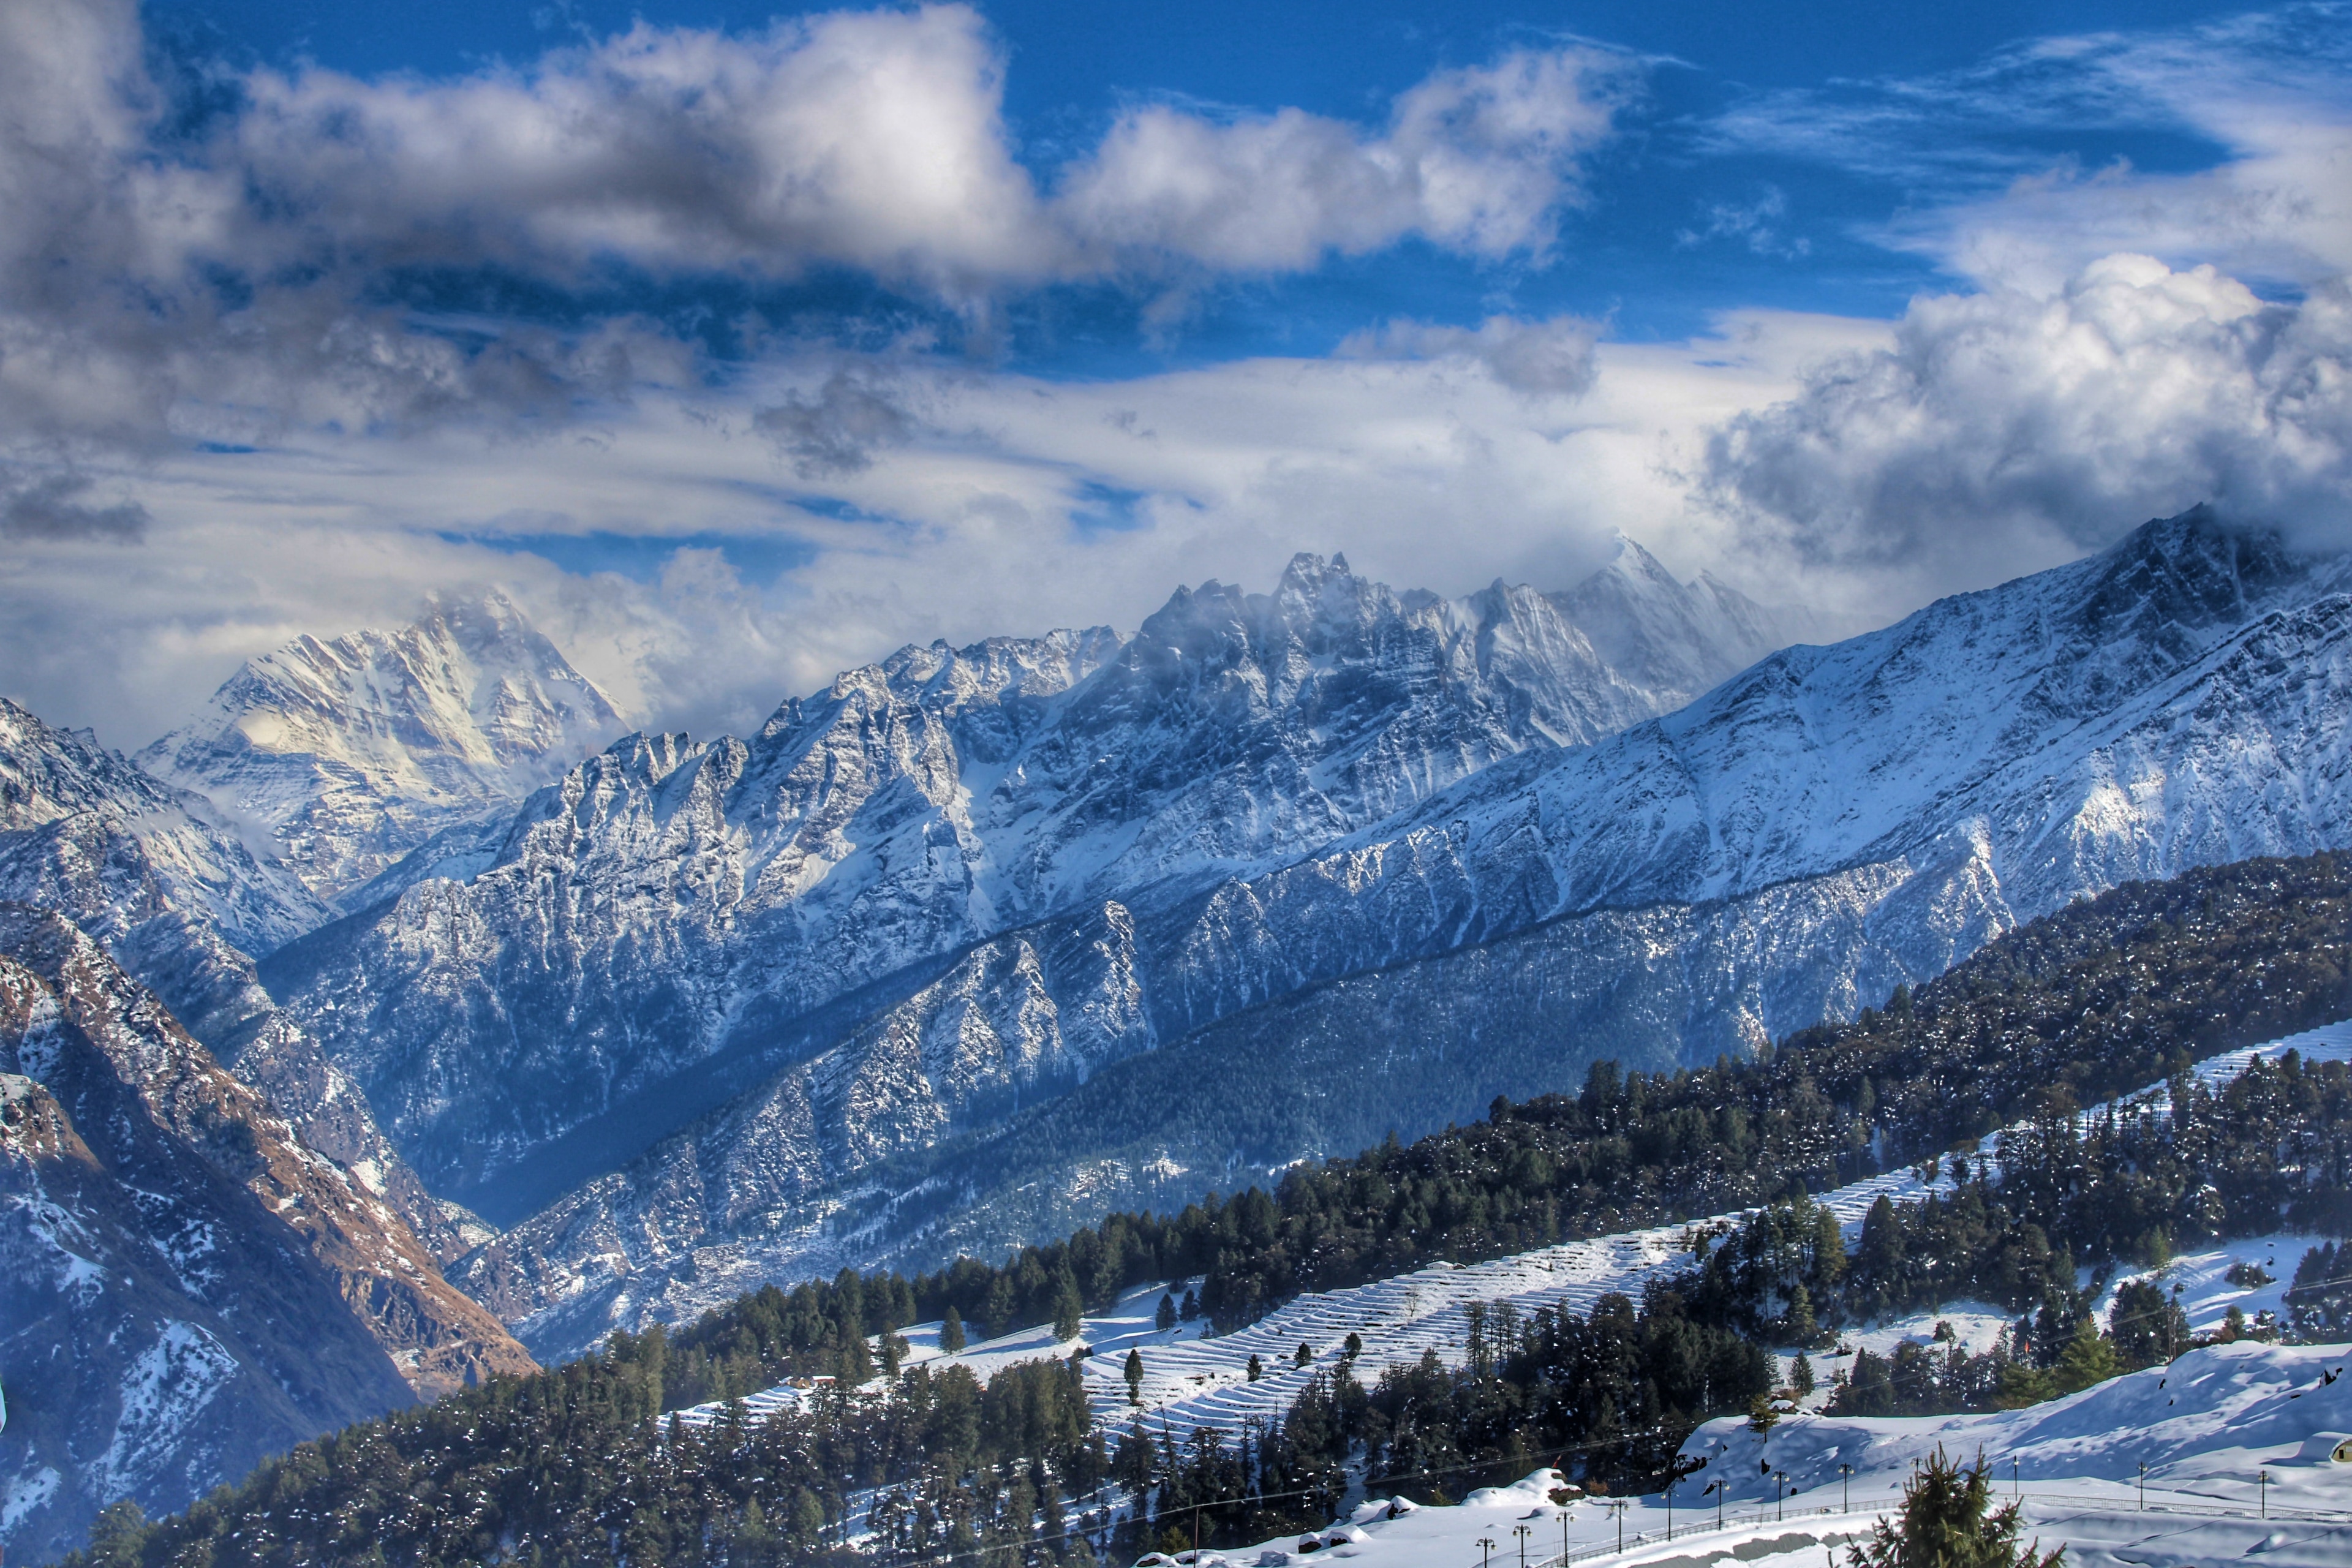 Auli in December: Places to Visit, Things to Do, and the Weather